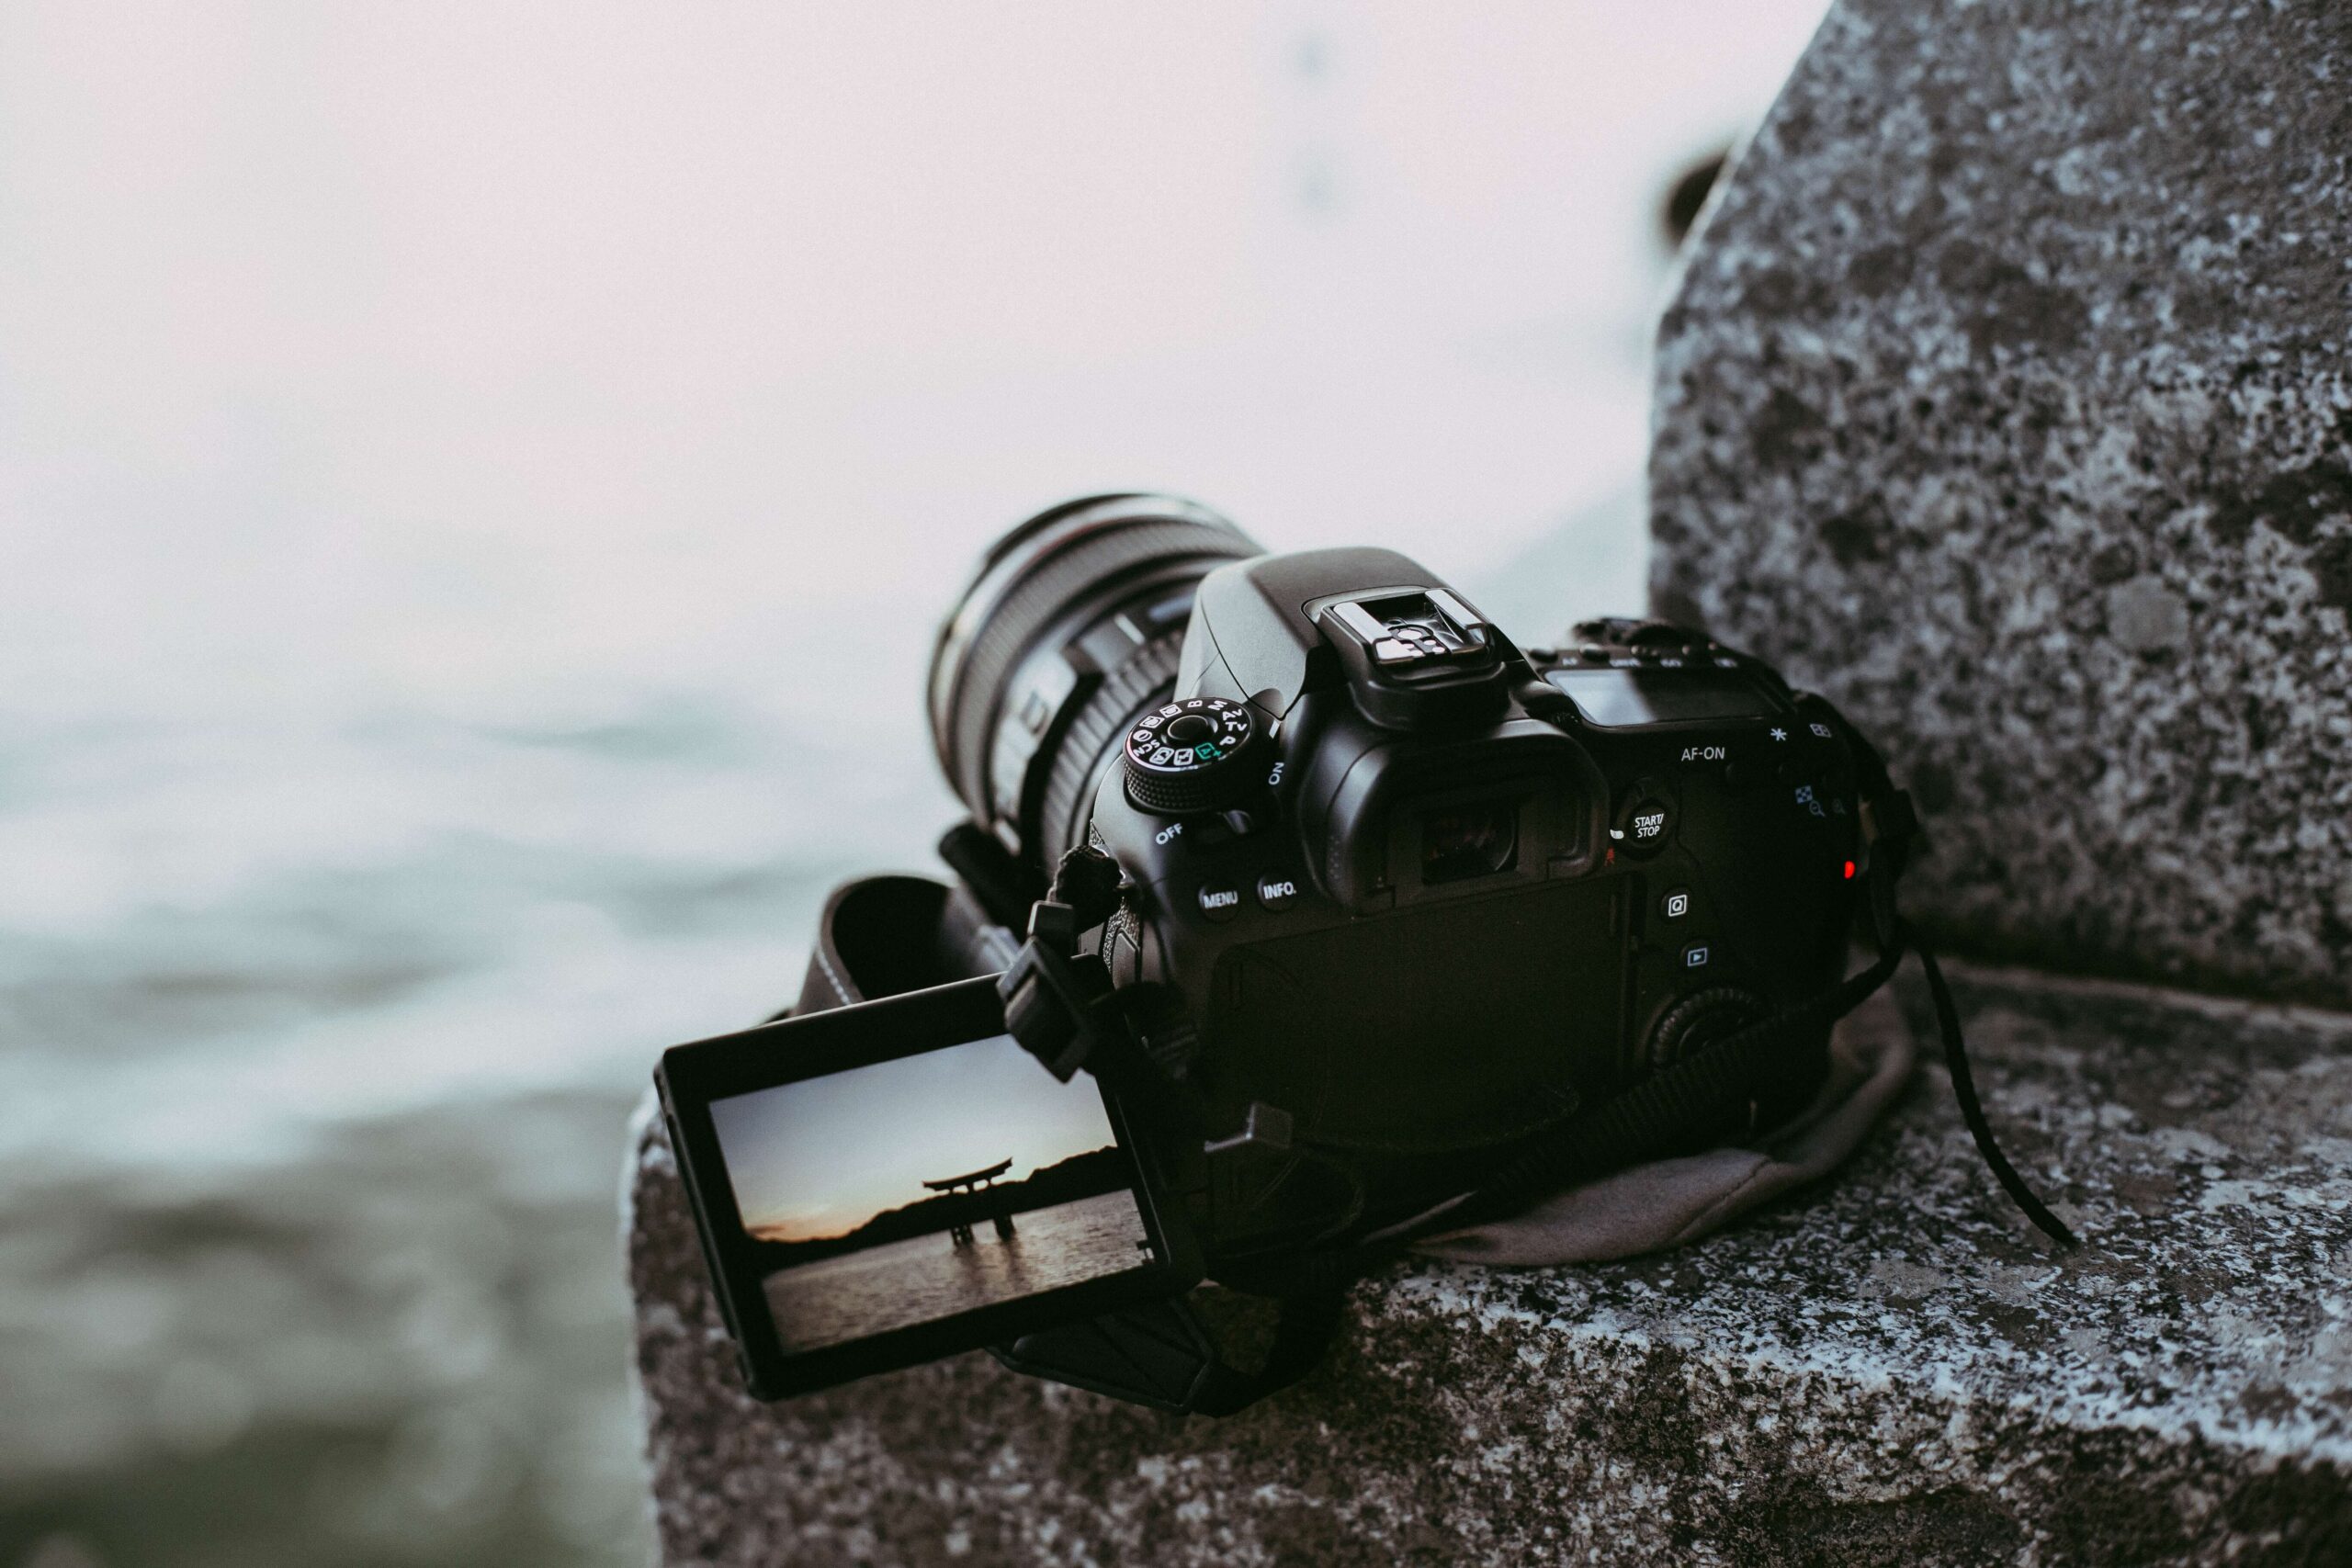 The Best Online Resources For Learning Photography